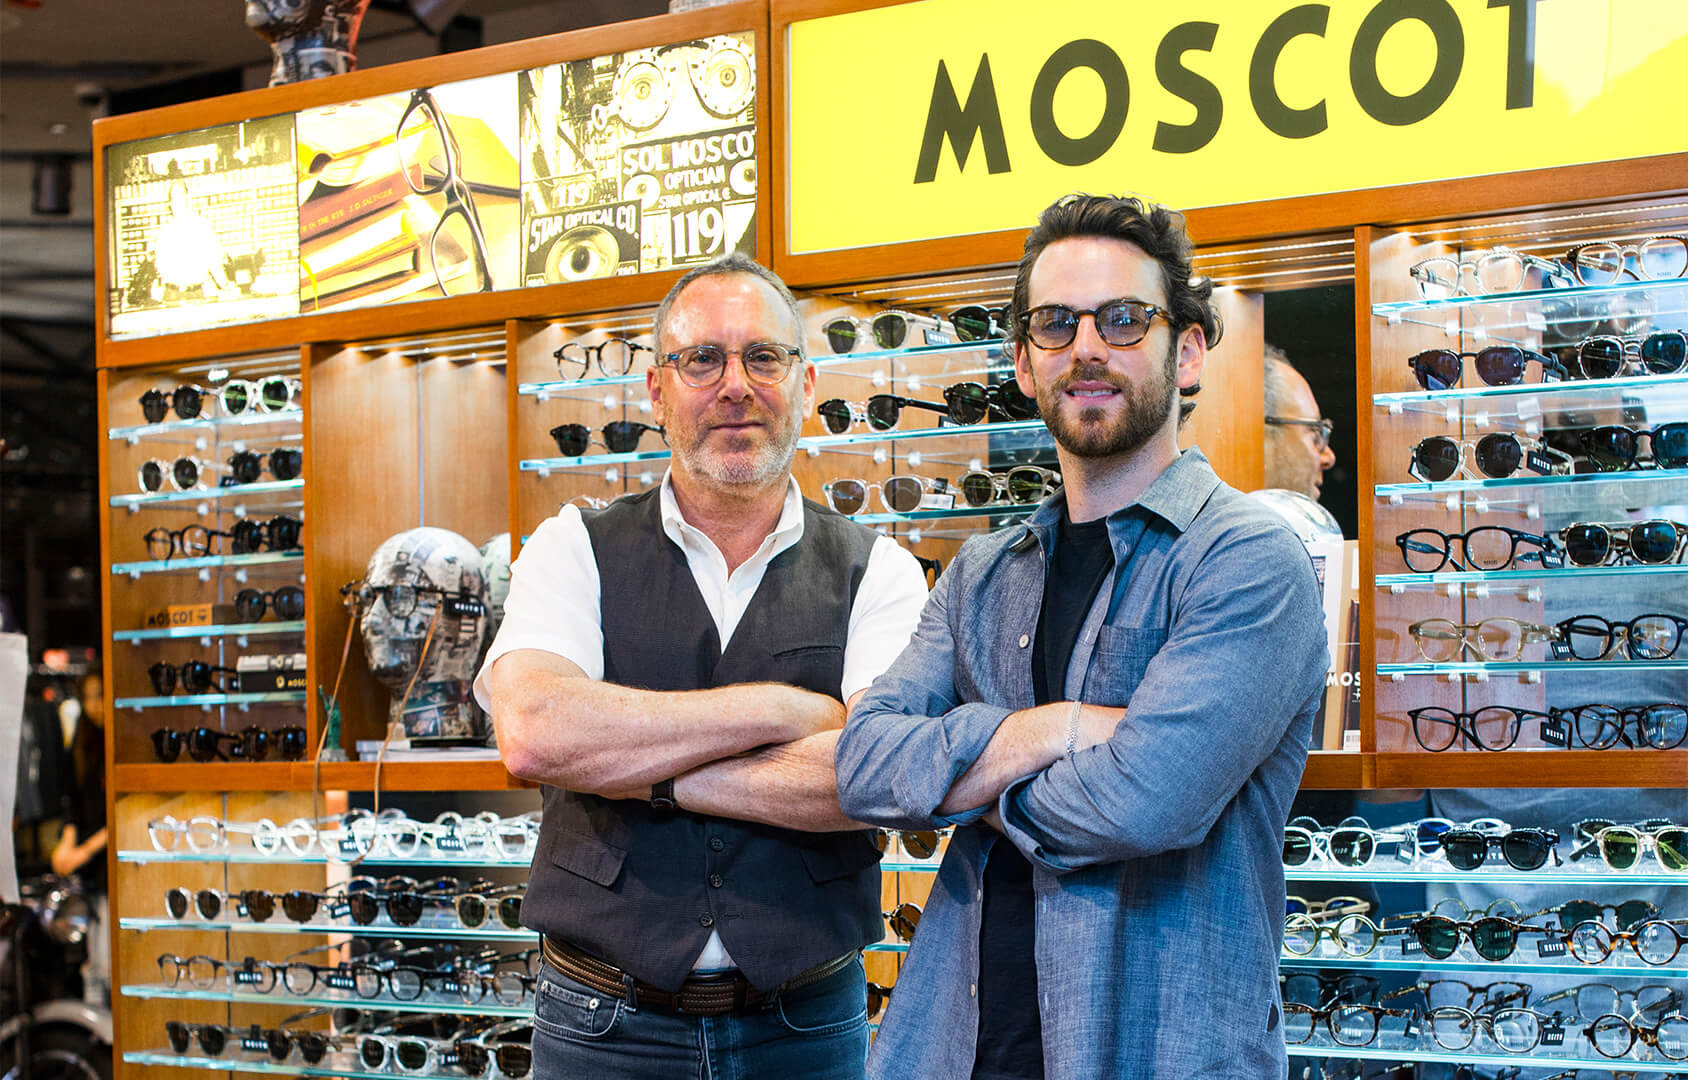 Harvey Moscot (4th Gen.) and Zack Moscot (5th Gen.) join Scott Kerr on The Luxury Item Podcast